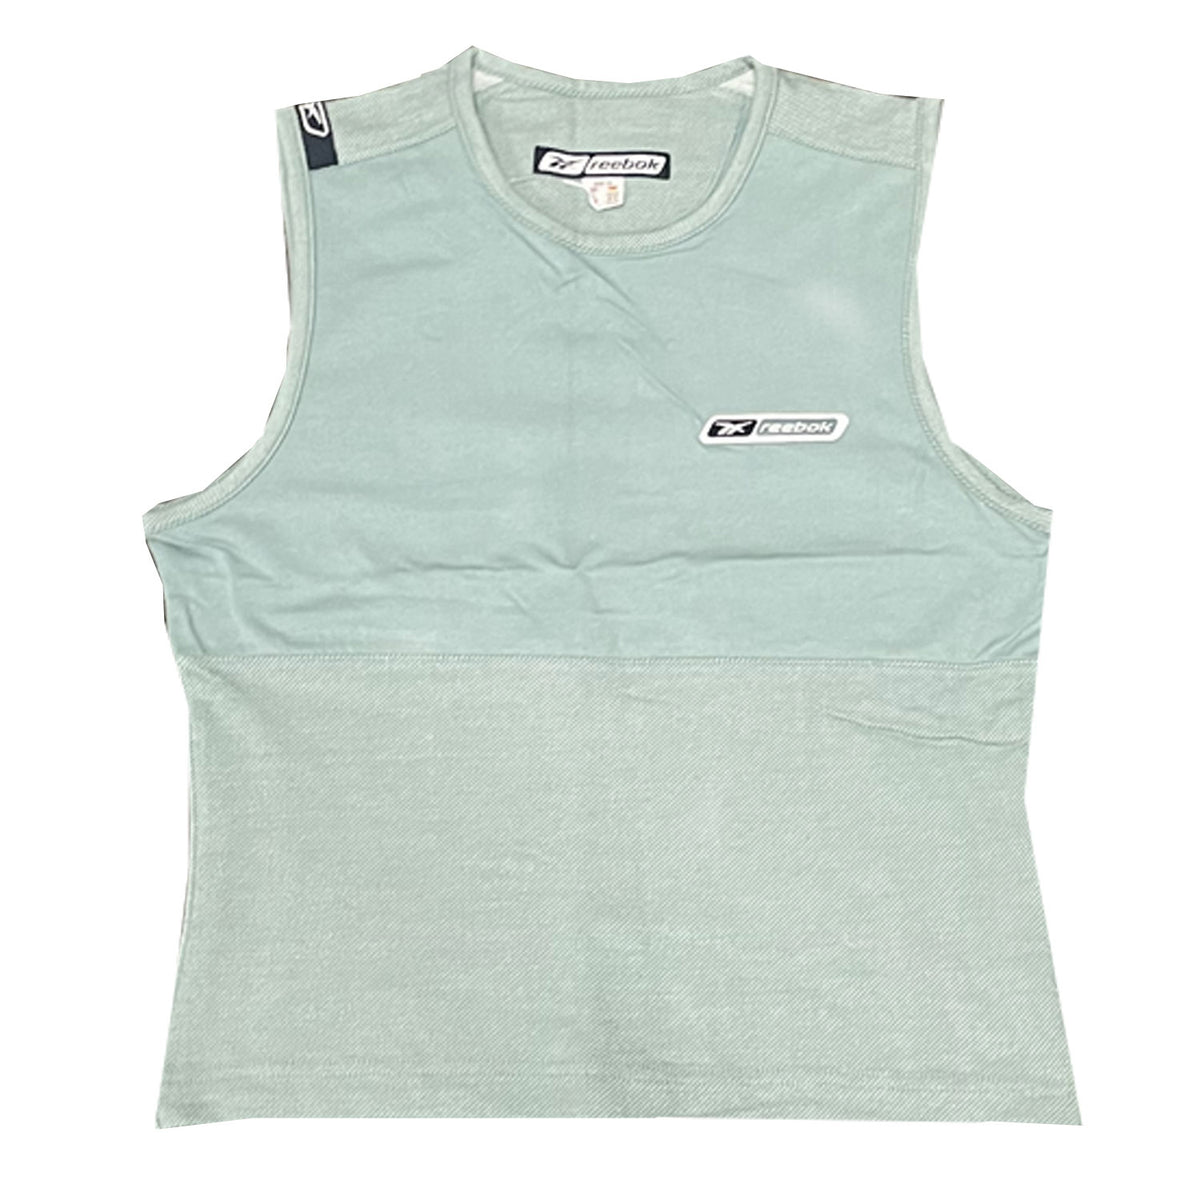 Reebok Womens Classic Sports Freestyle Vest Top - RRP £14.99